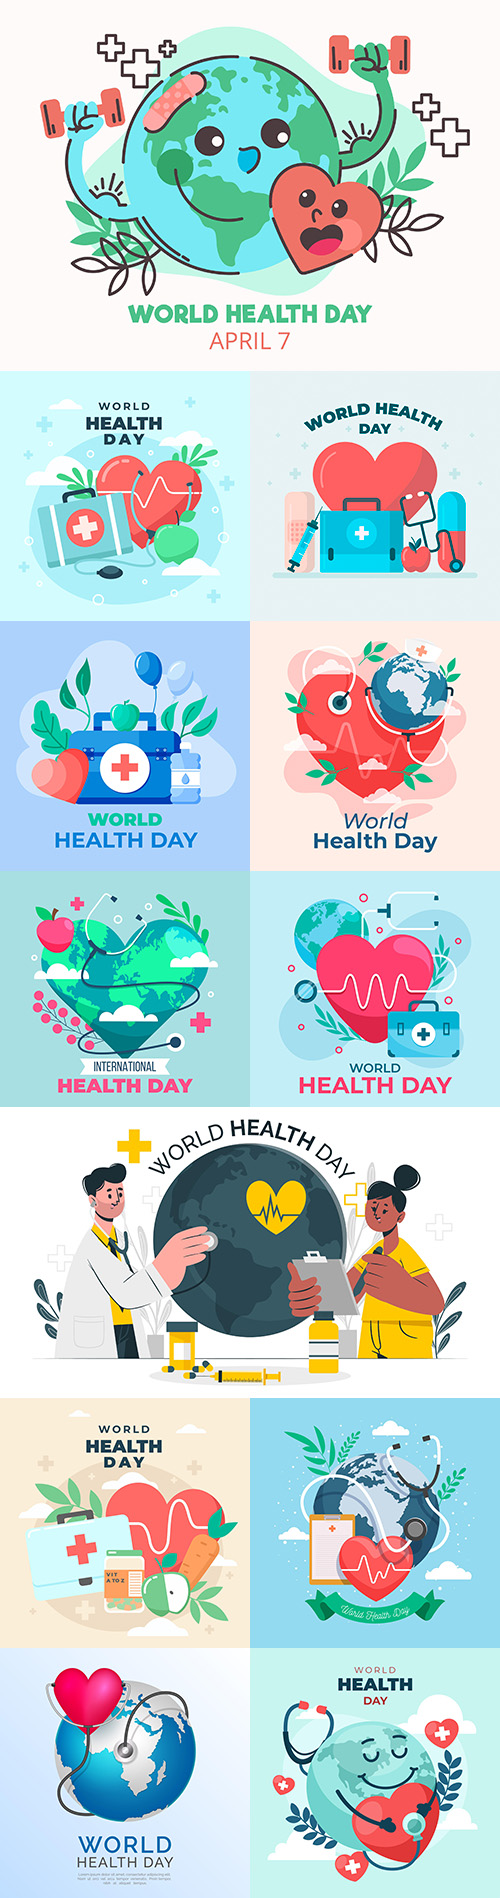 World health day with planet and heart illustration flat design
